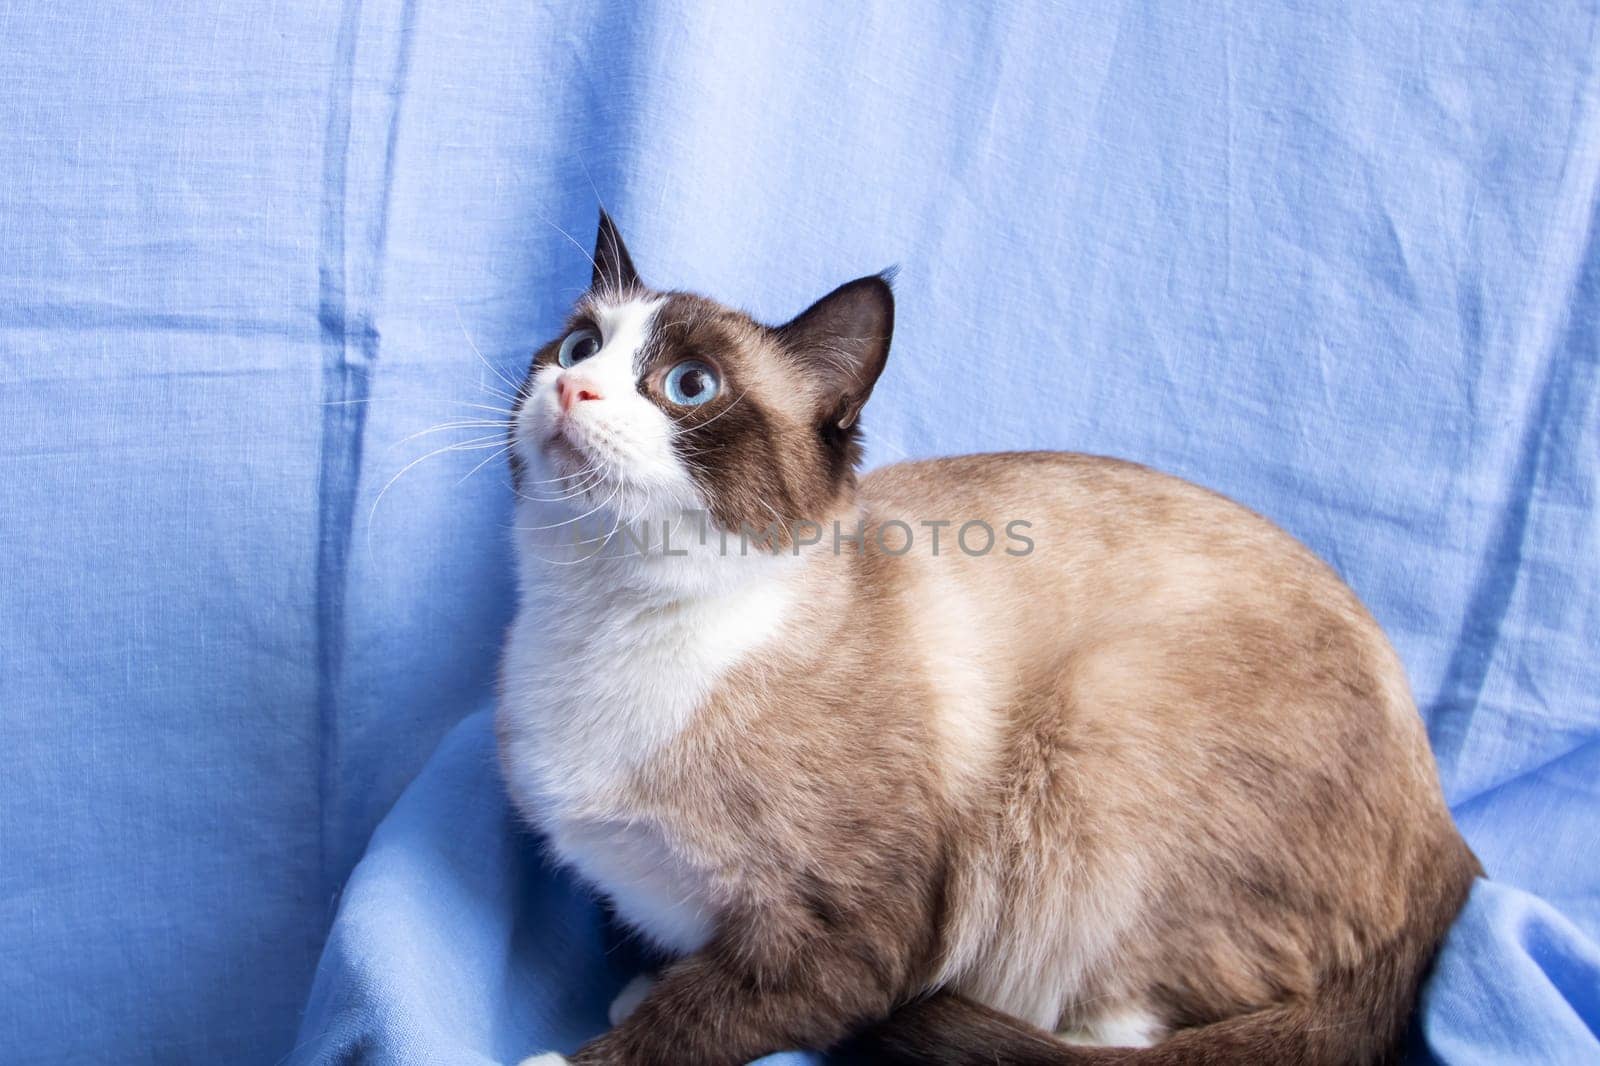 Gray cat with blue eyes portrait on blue background by Vera1703